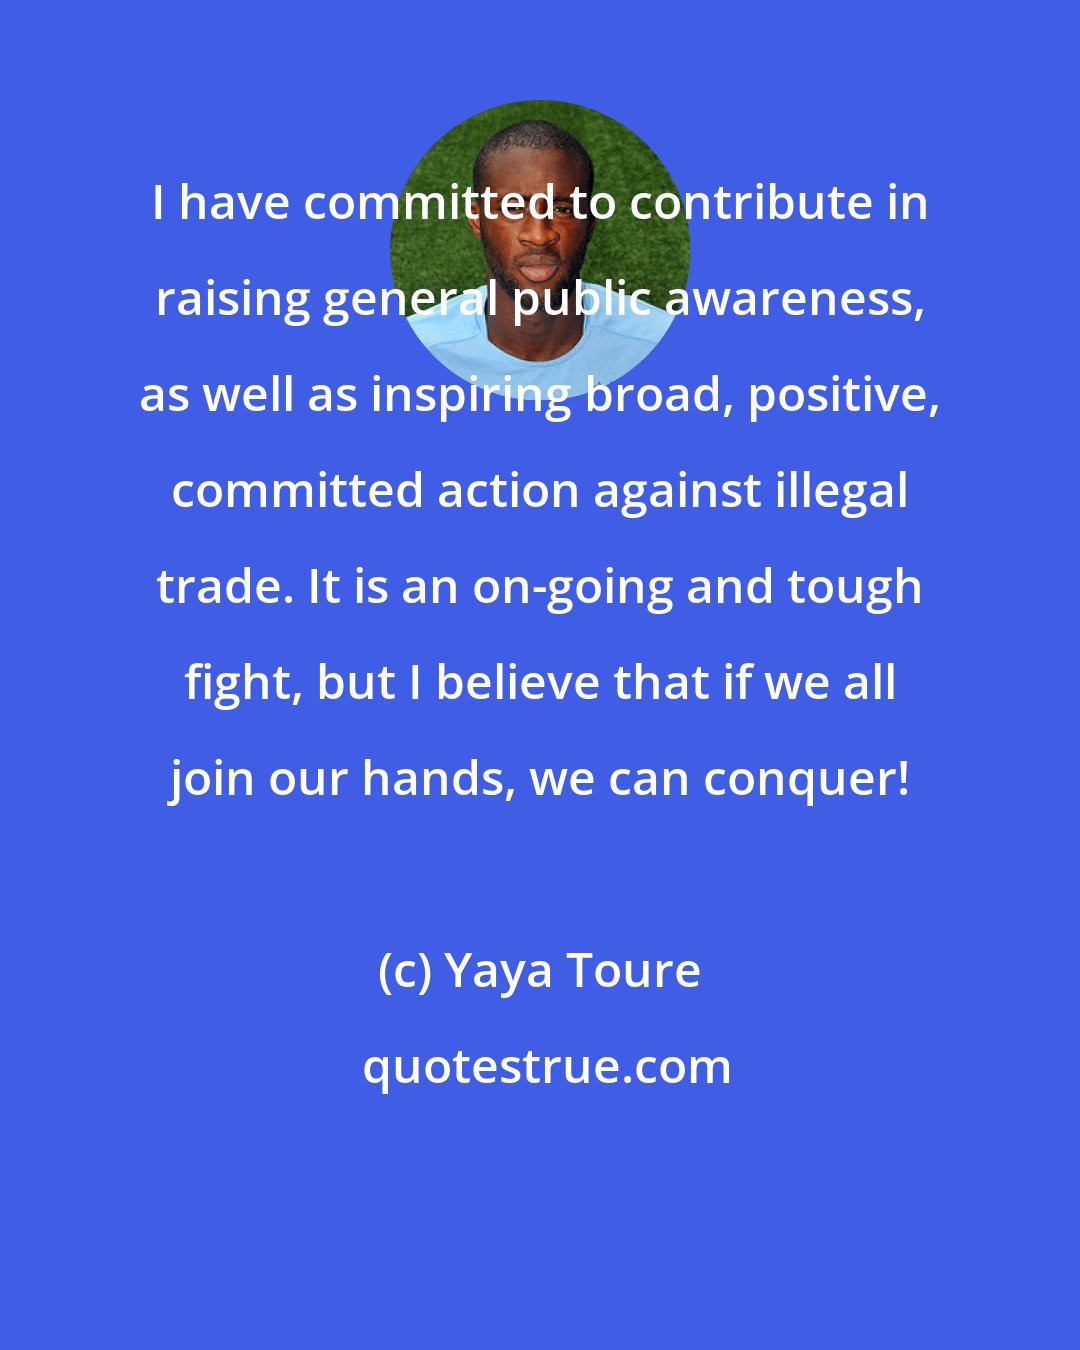 Yaya Toure: I have committed to contribute in raising general public awareness, as well as inspiring broad, positive, committed action against illegal trade. It is an on-going and tough fight, but I believe that if we all join our hands, we can conquer!